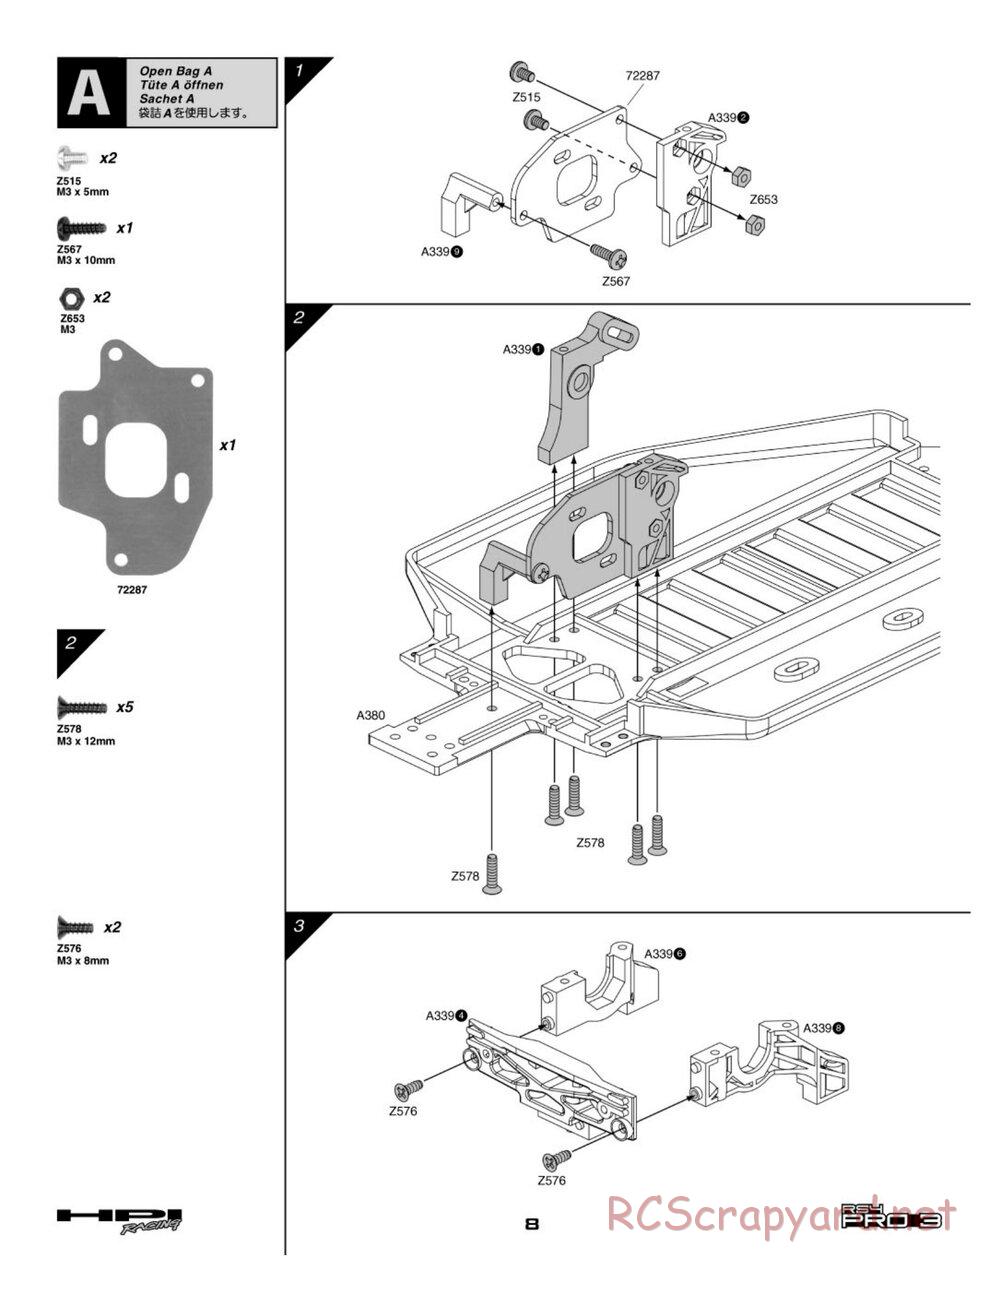 HPI - RS4 Pro 3 - Manual - Page 8